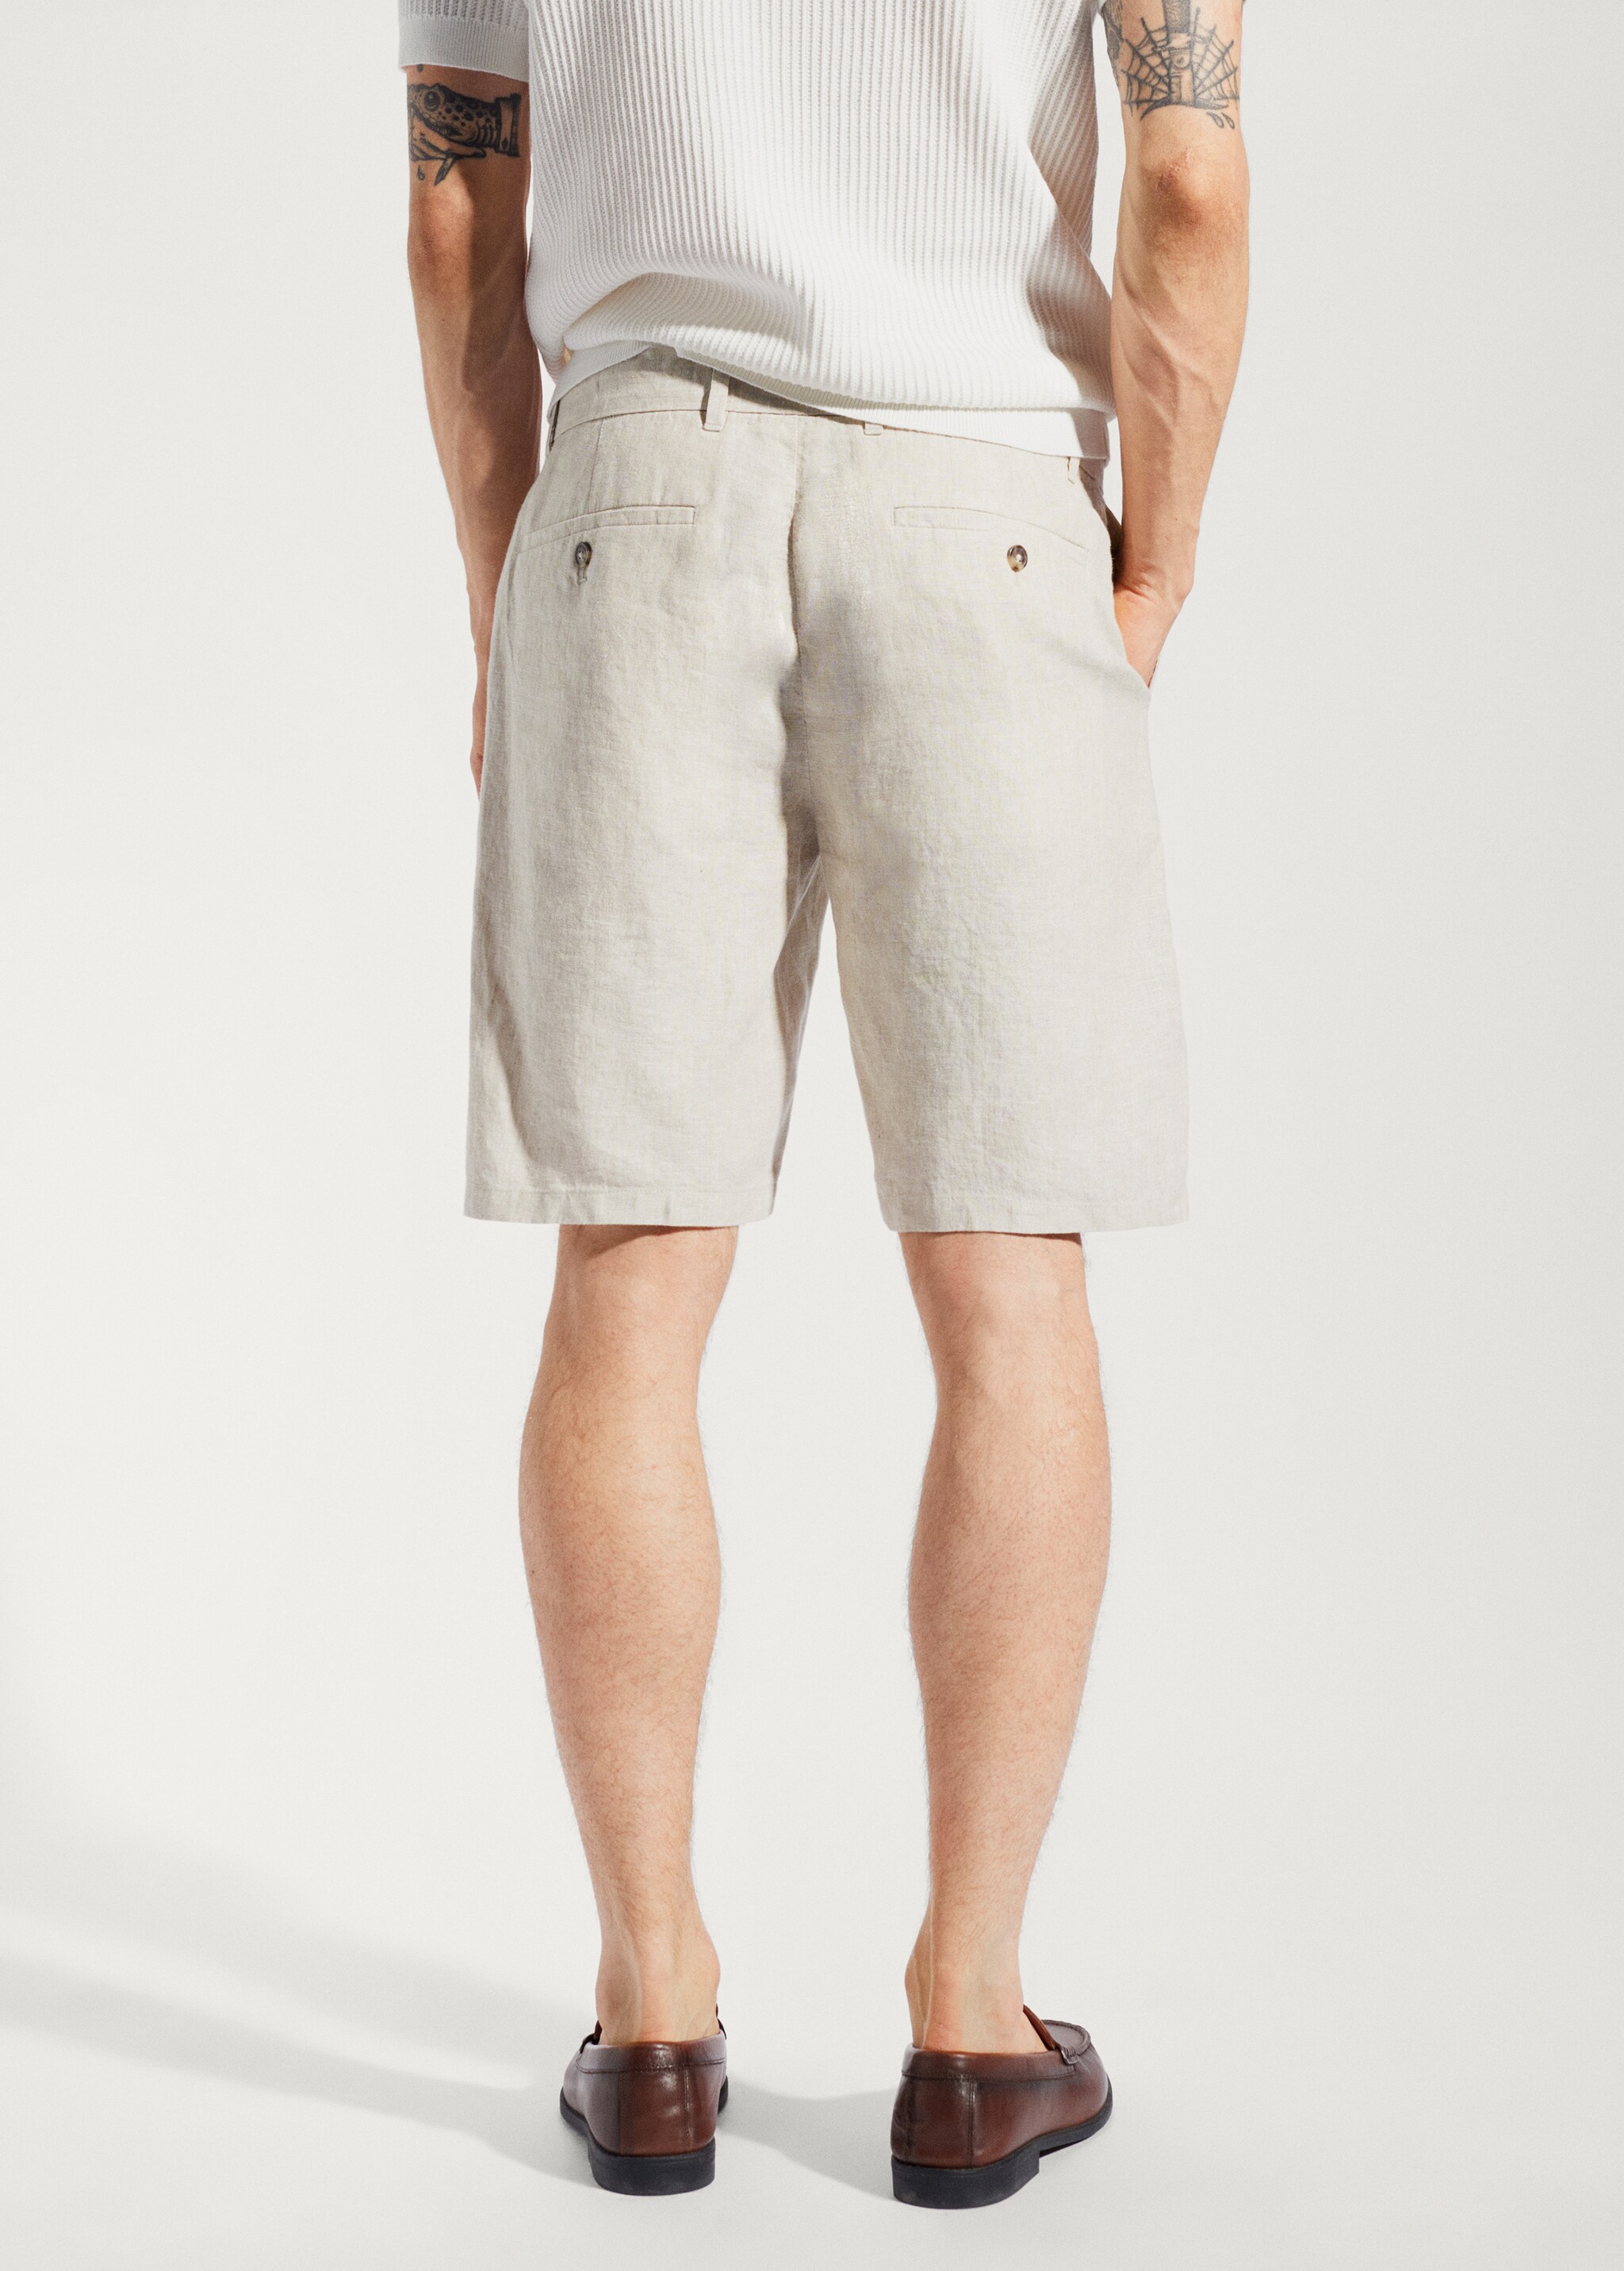 100% linen shorts - Reverse of the article